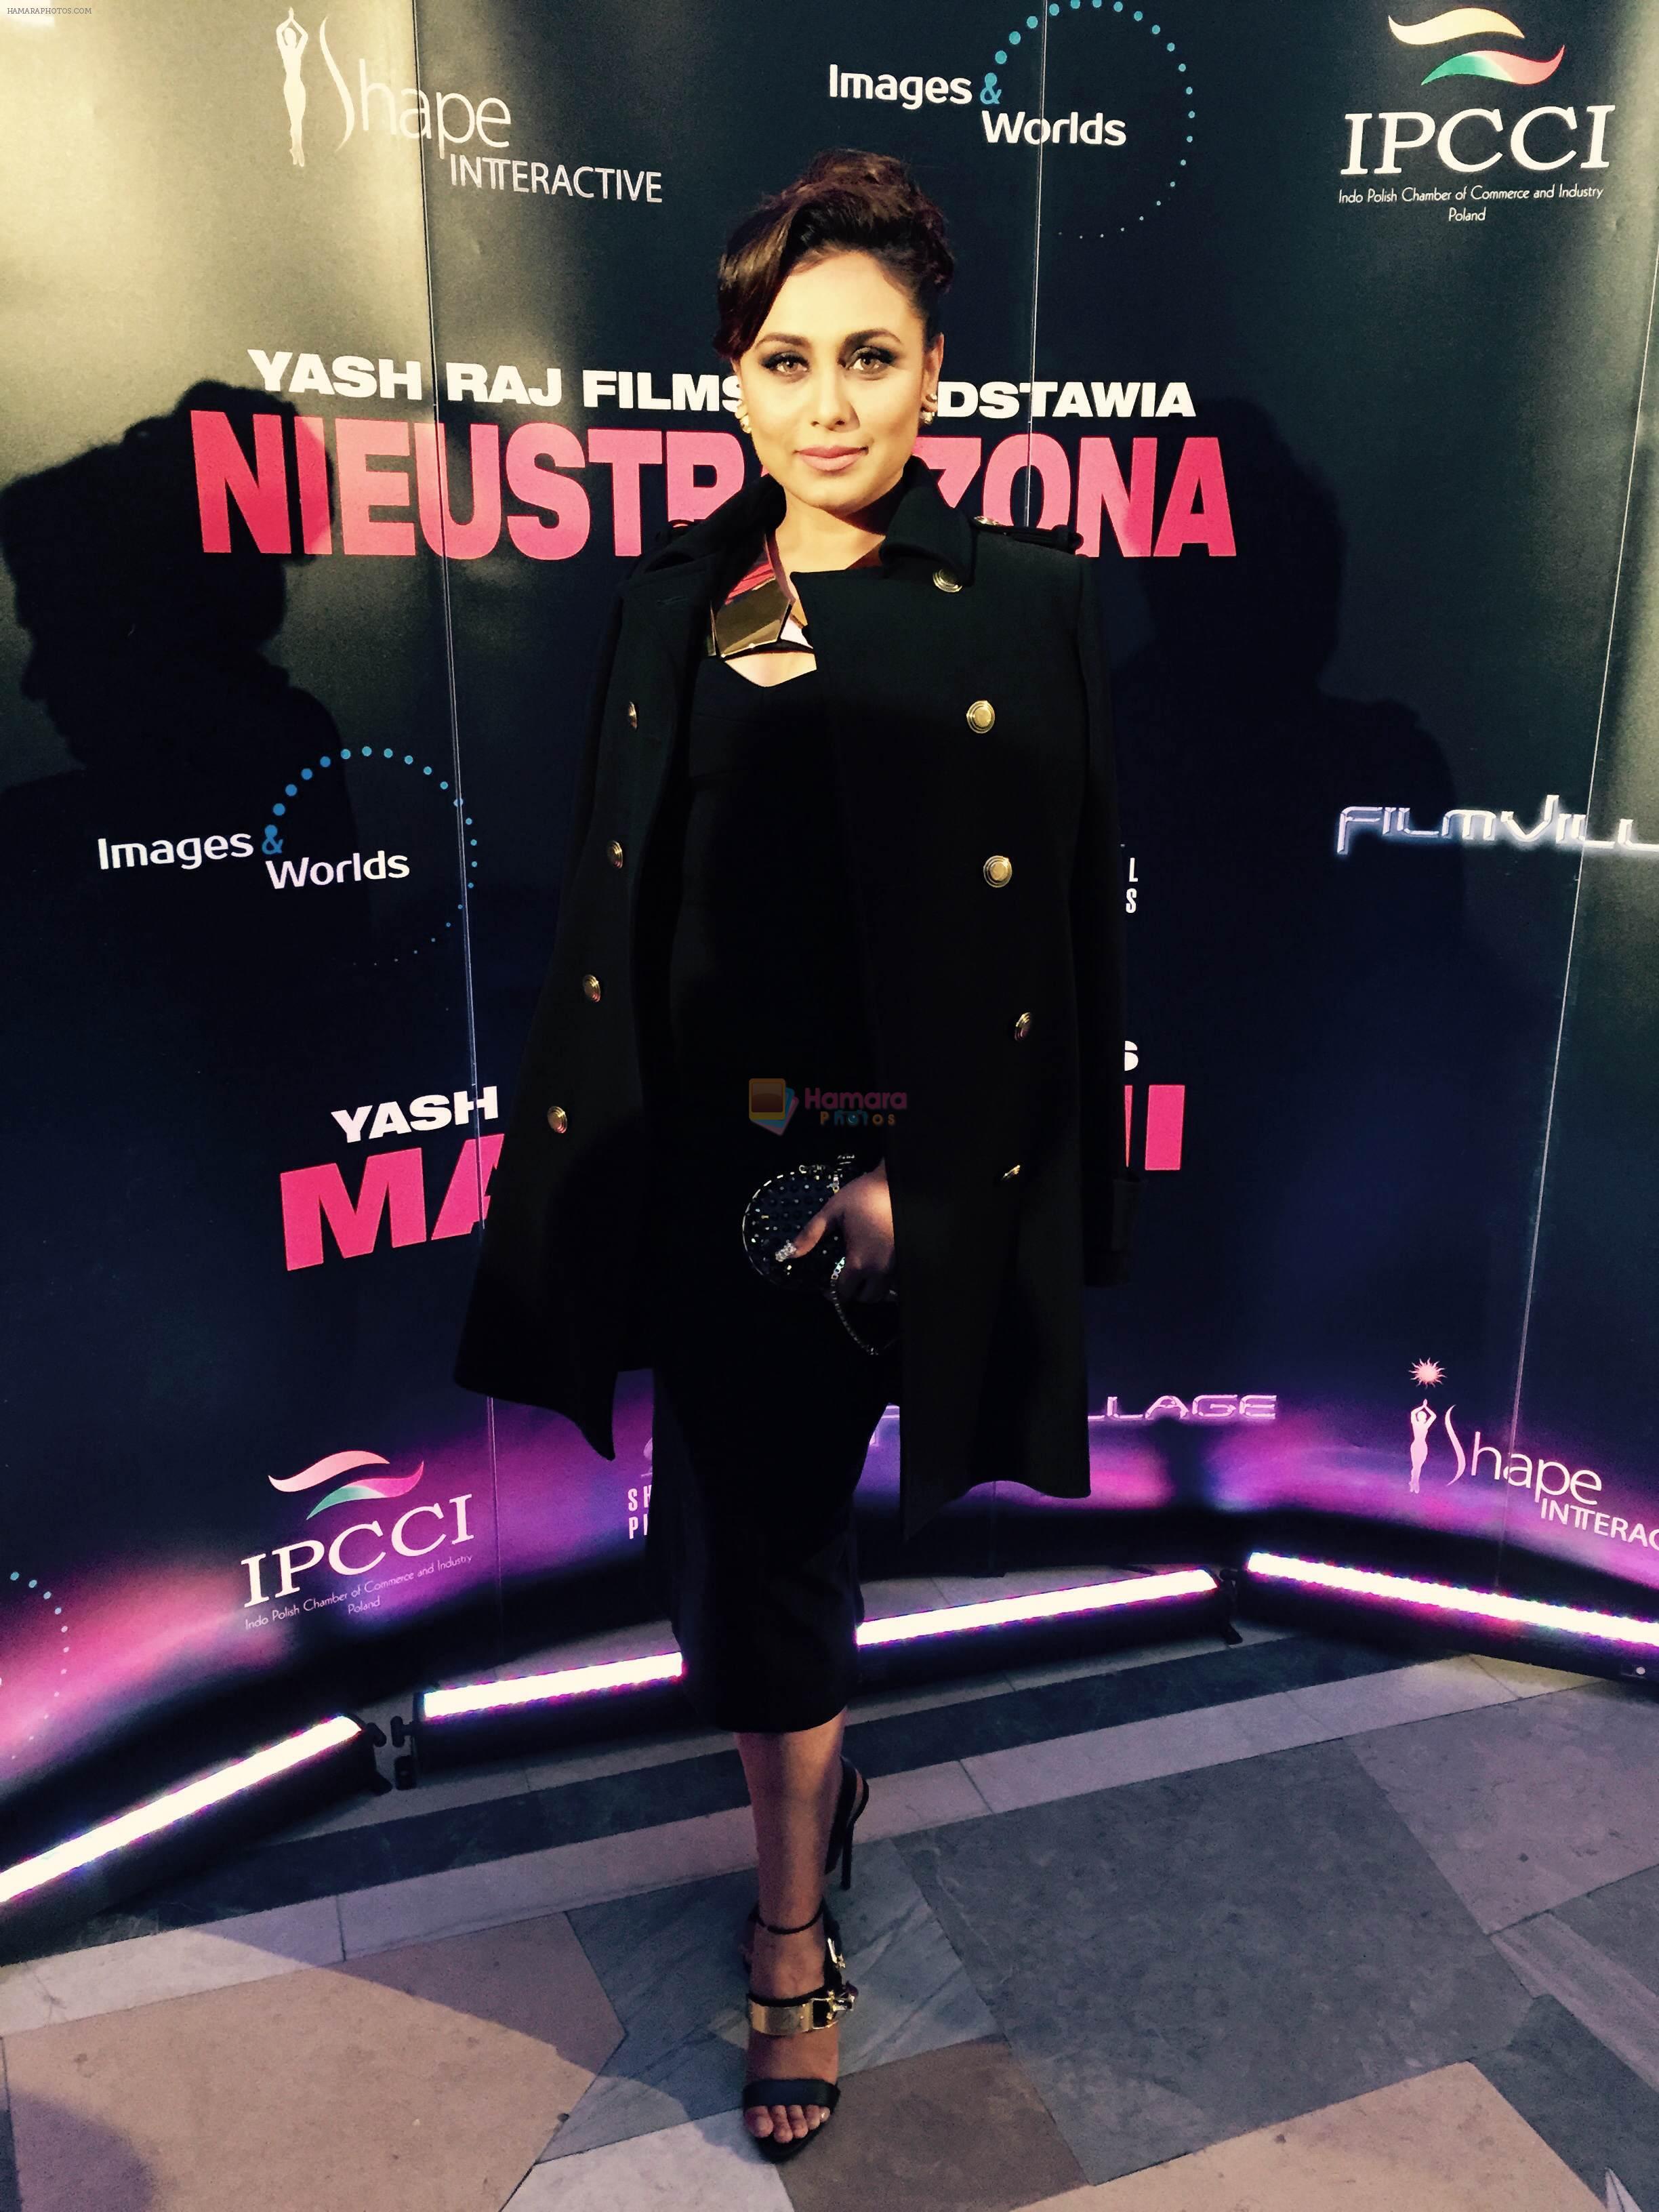 Rani Mukerji at the Polish premiere of Yash Raj Films_ Mardaani. The film premiered in Poland at the Kino Muranow theatre in Warsaw, one of the oldest art house theatres in the country on  28th January, 2015